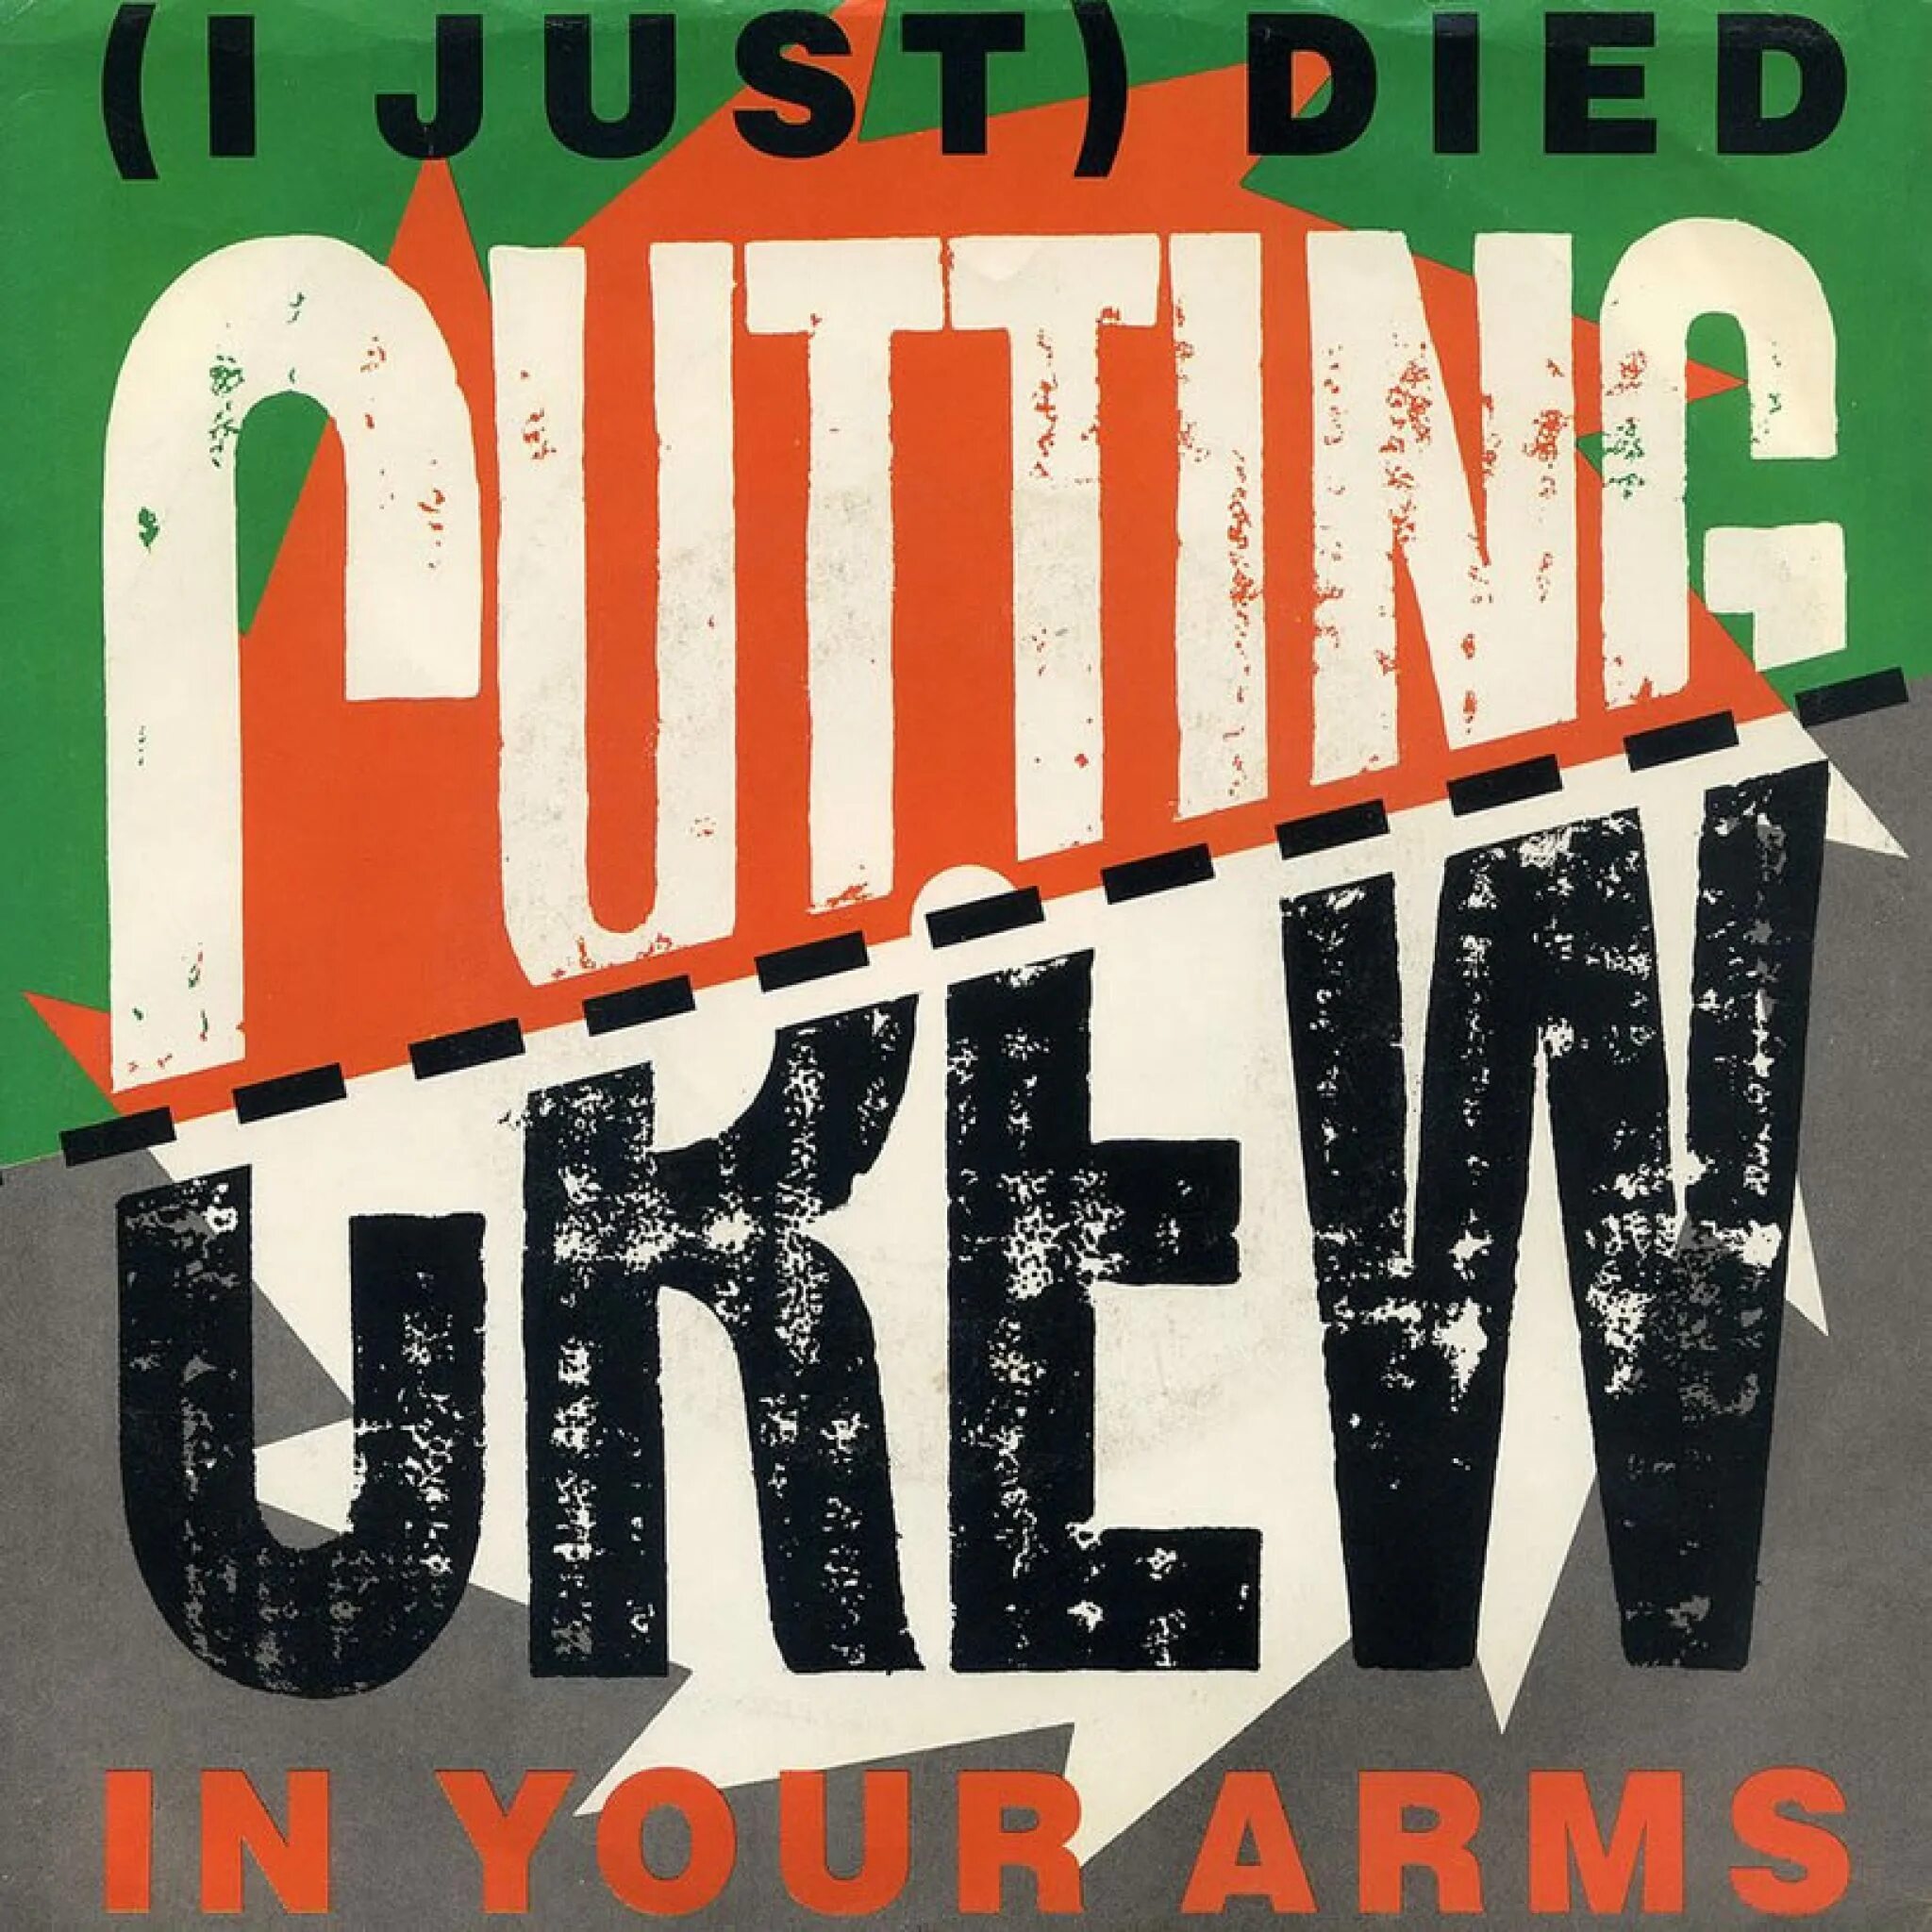 In your. Cutting Crew i just died in your Arms. Died in your Arms Cutting Crew. Cutting Crew - (i just) died in your Arms Tonight. Обложка альбома Cutting Crew - (i just) died in your Arms.